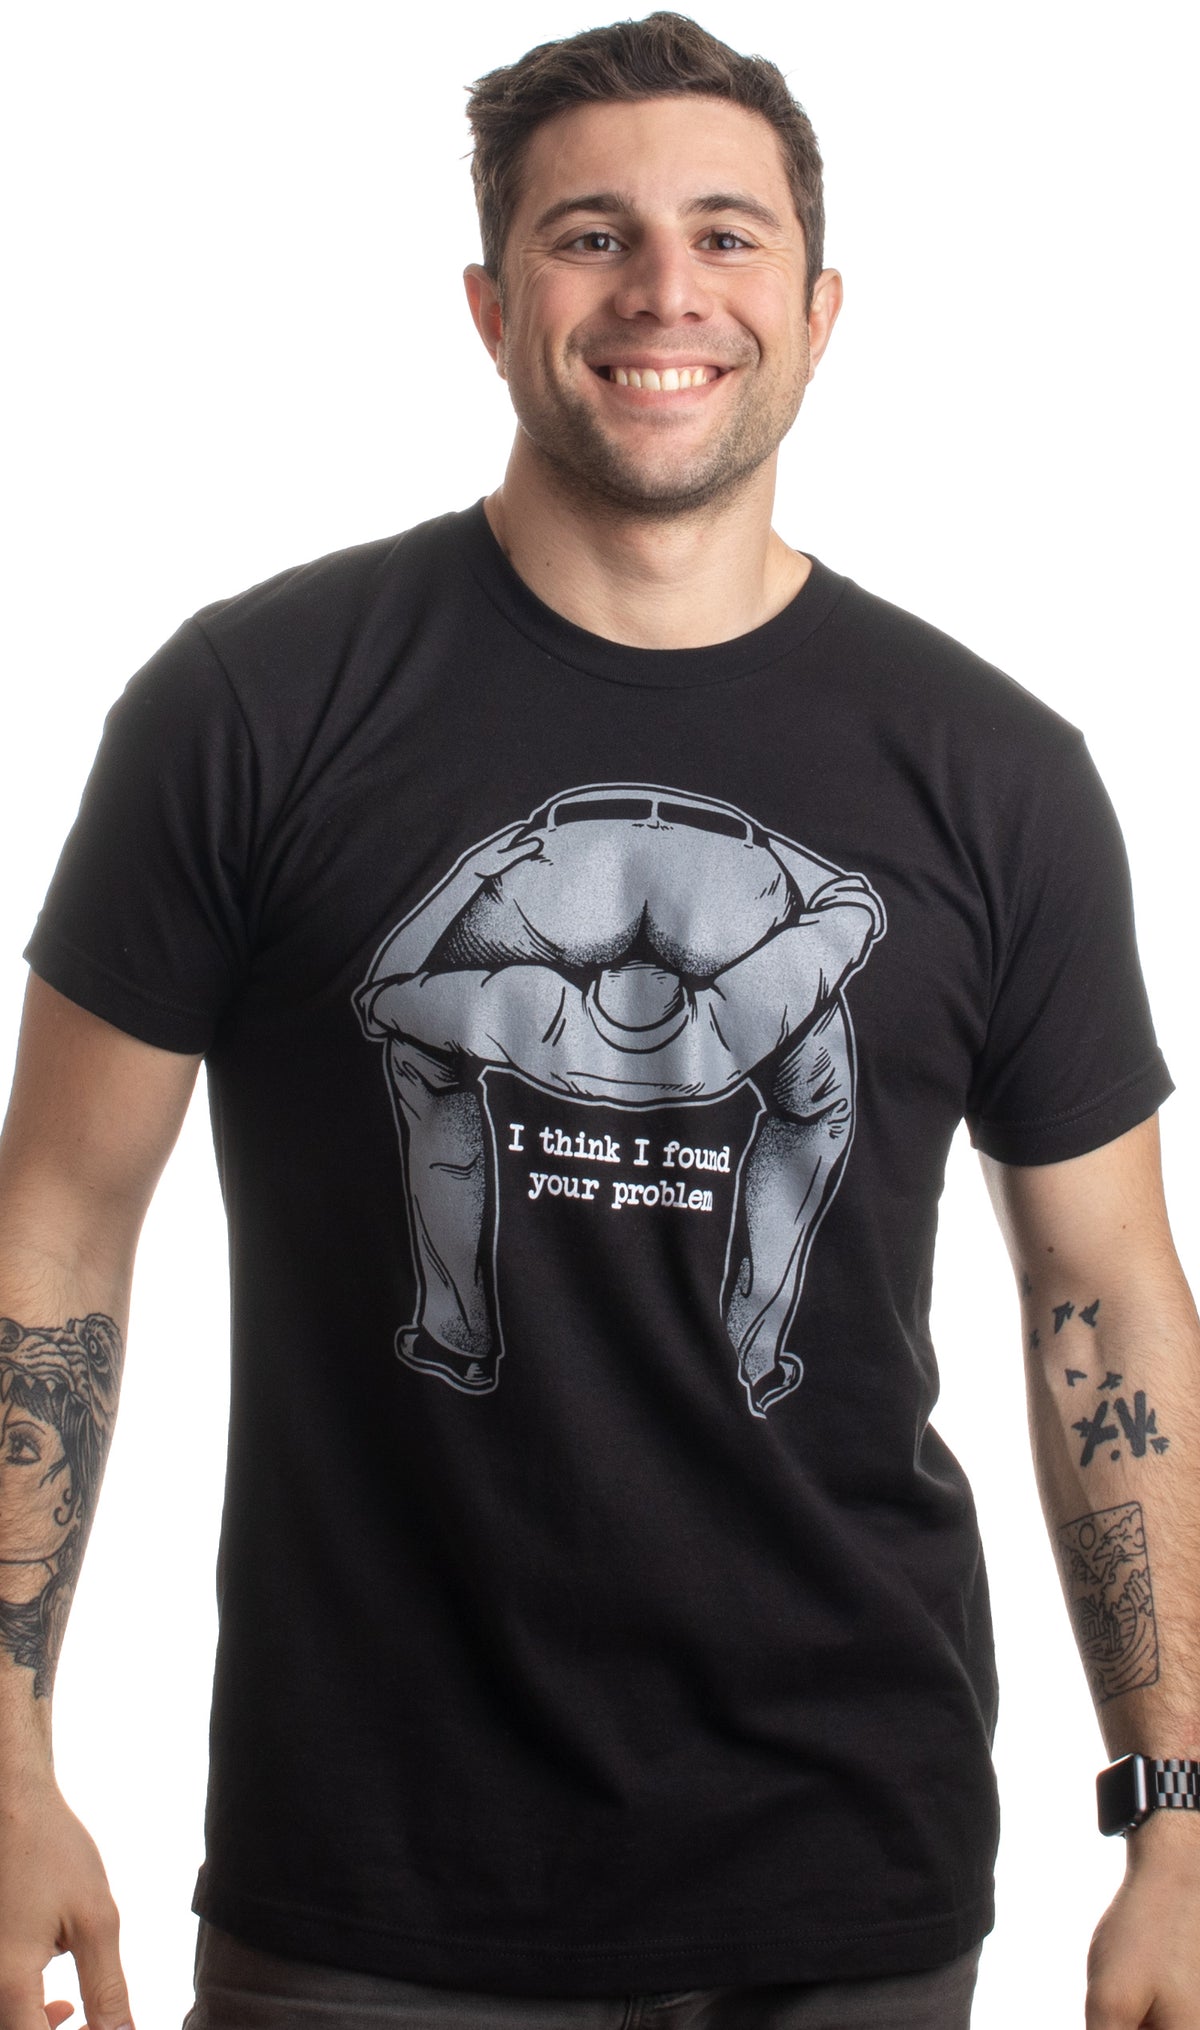 I Found Your Problem | Funny Sarcasm Rude Offensive Saying Meme for Man T-shirt